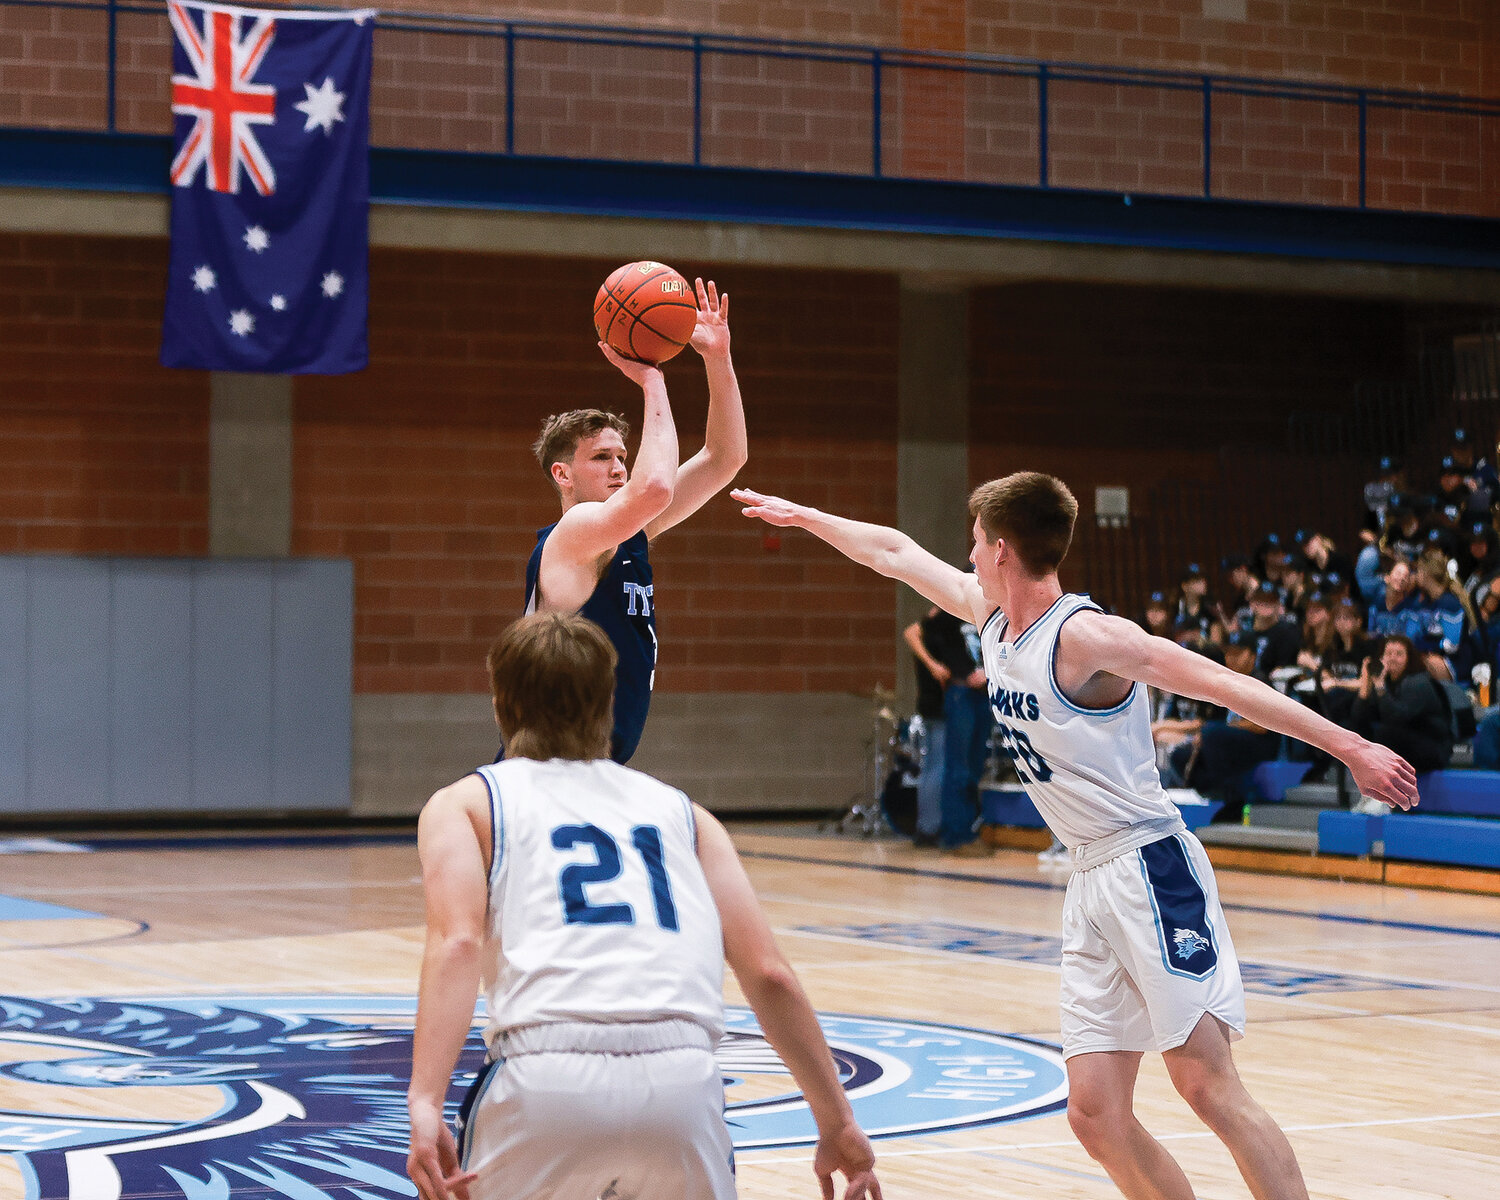 Tenison Woods’ Harry Mules shoots a three as the Australian flag hangs in the background during a game between the Hockinson Hawks and the Tenison Woods Titans from Mount Gambier, Australia, on Thursday, Nov. 30.